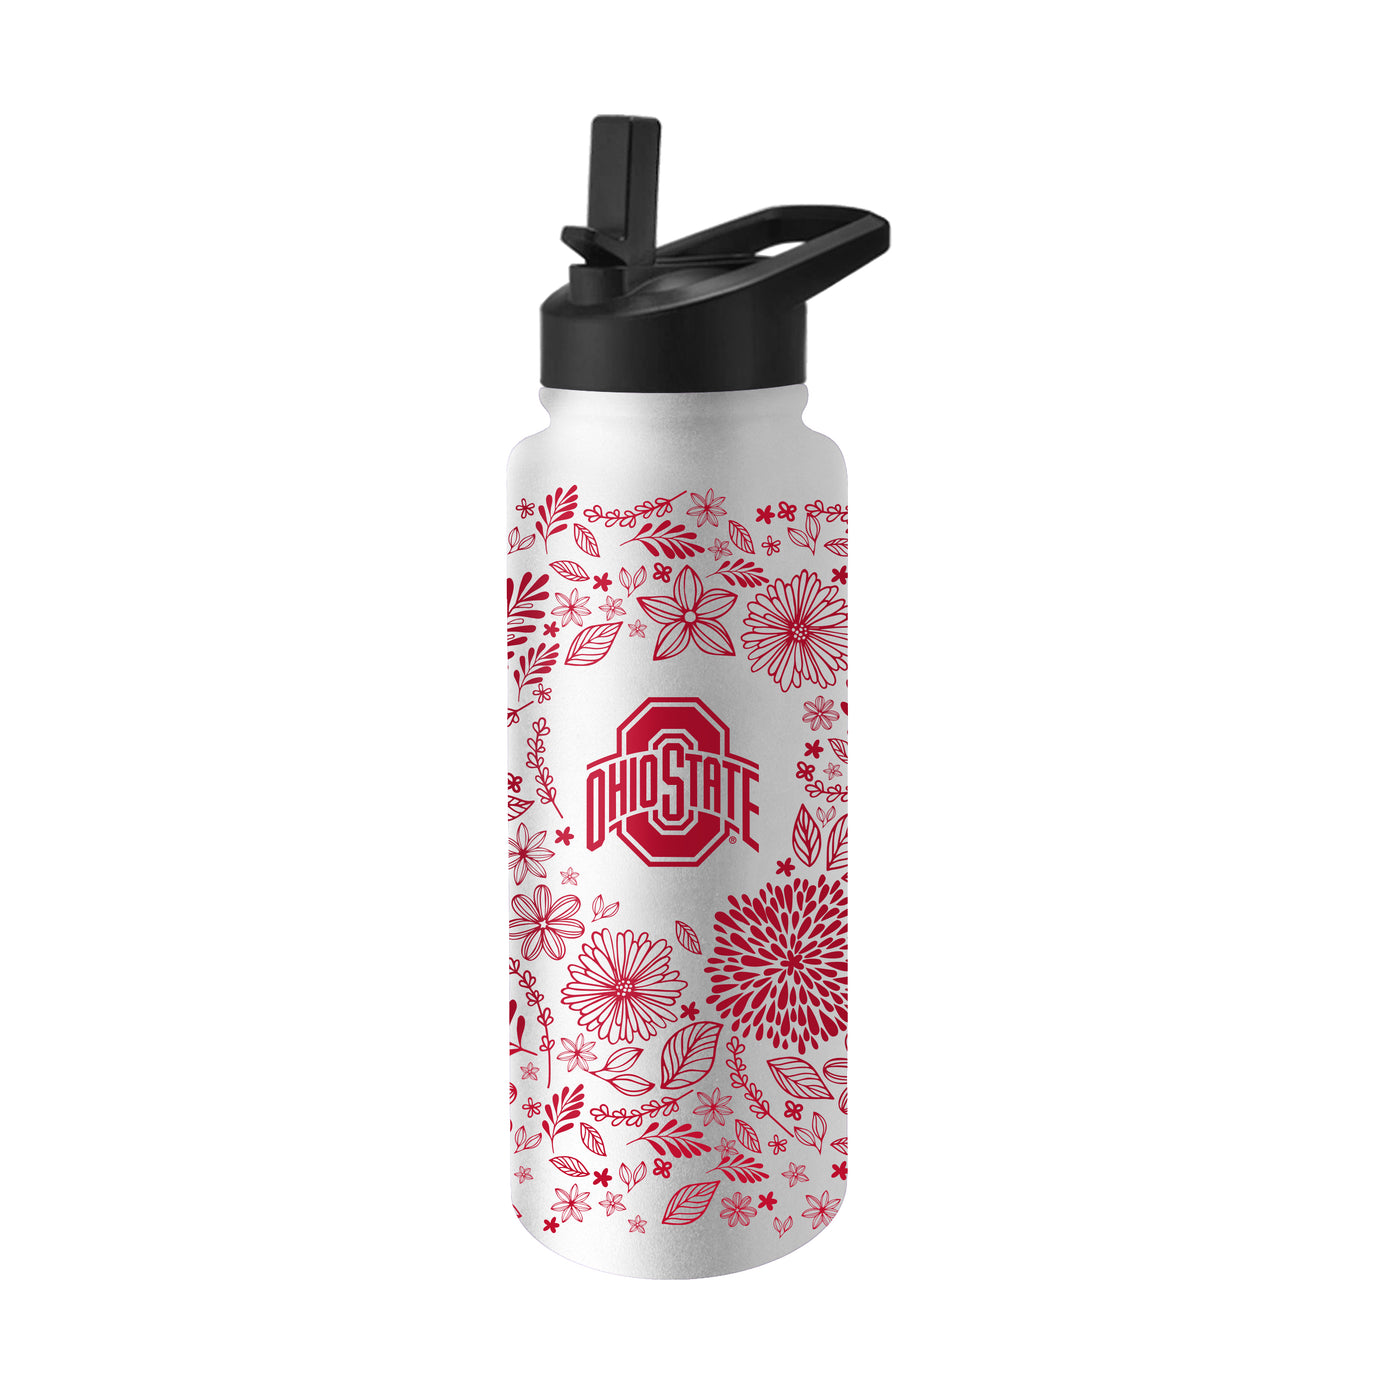 Ohio State Quencher Botanical Flip Top Water Bottle